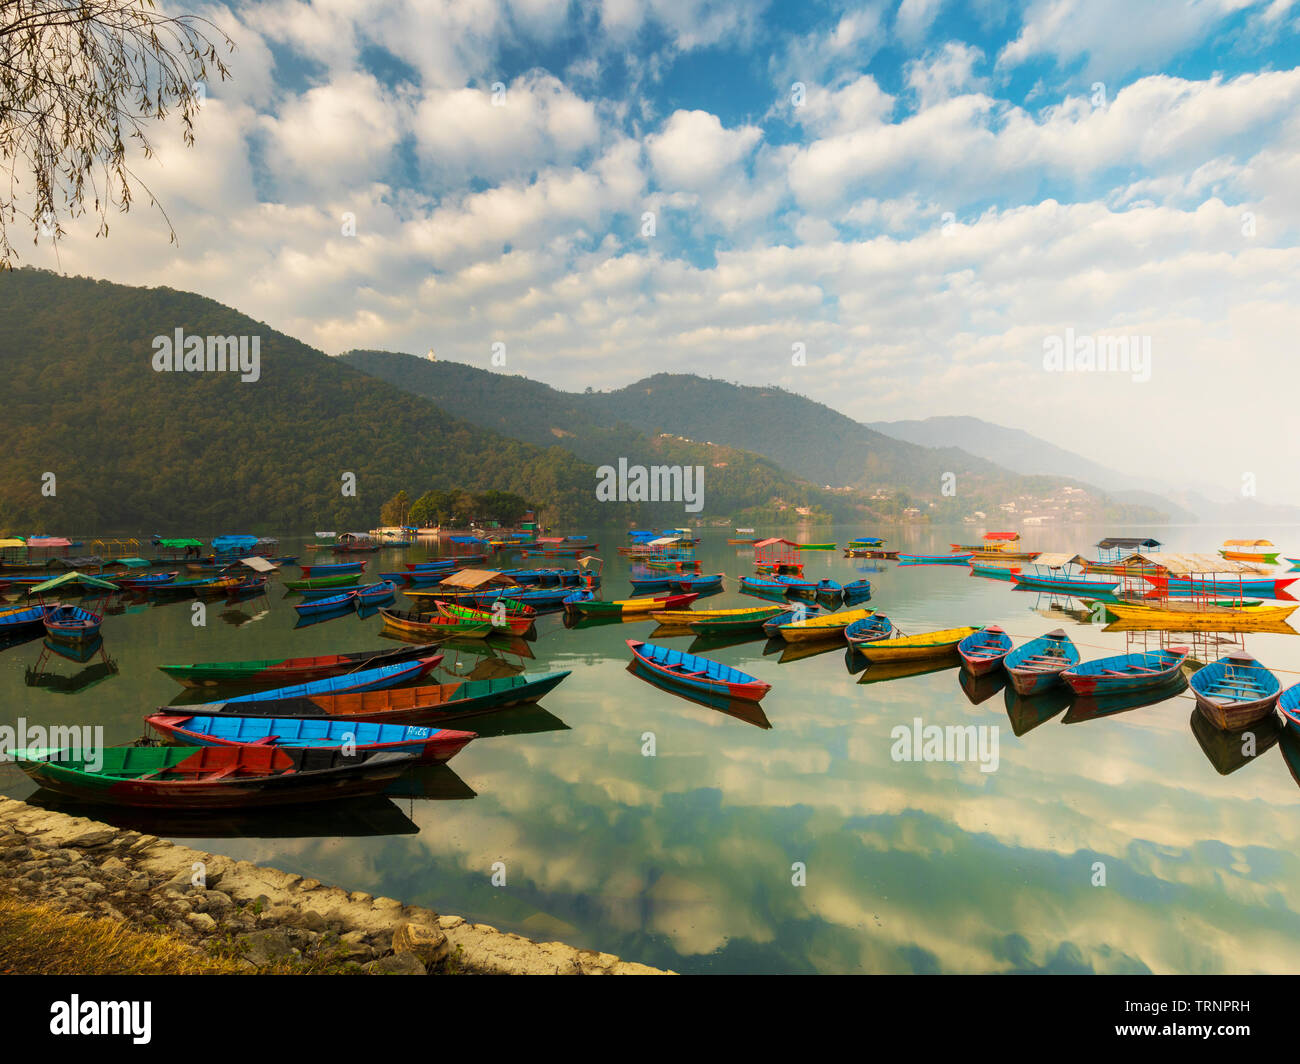 Nepal Boats with different colors,the blue Sky Reflection in the water.Phewa Lake Pokhara Nepal. Stock Photo